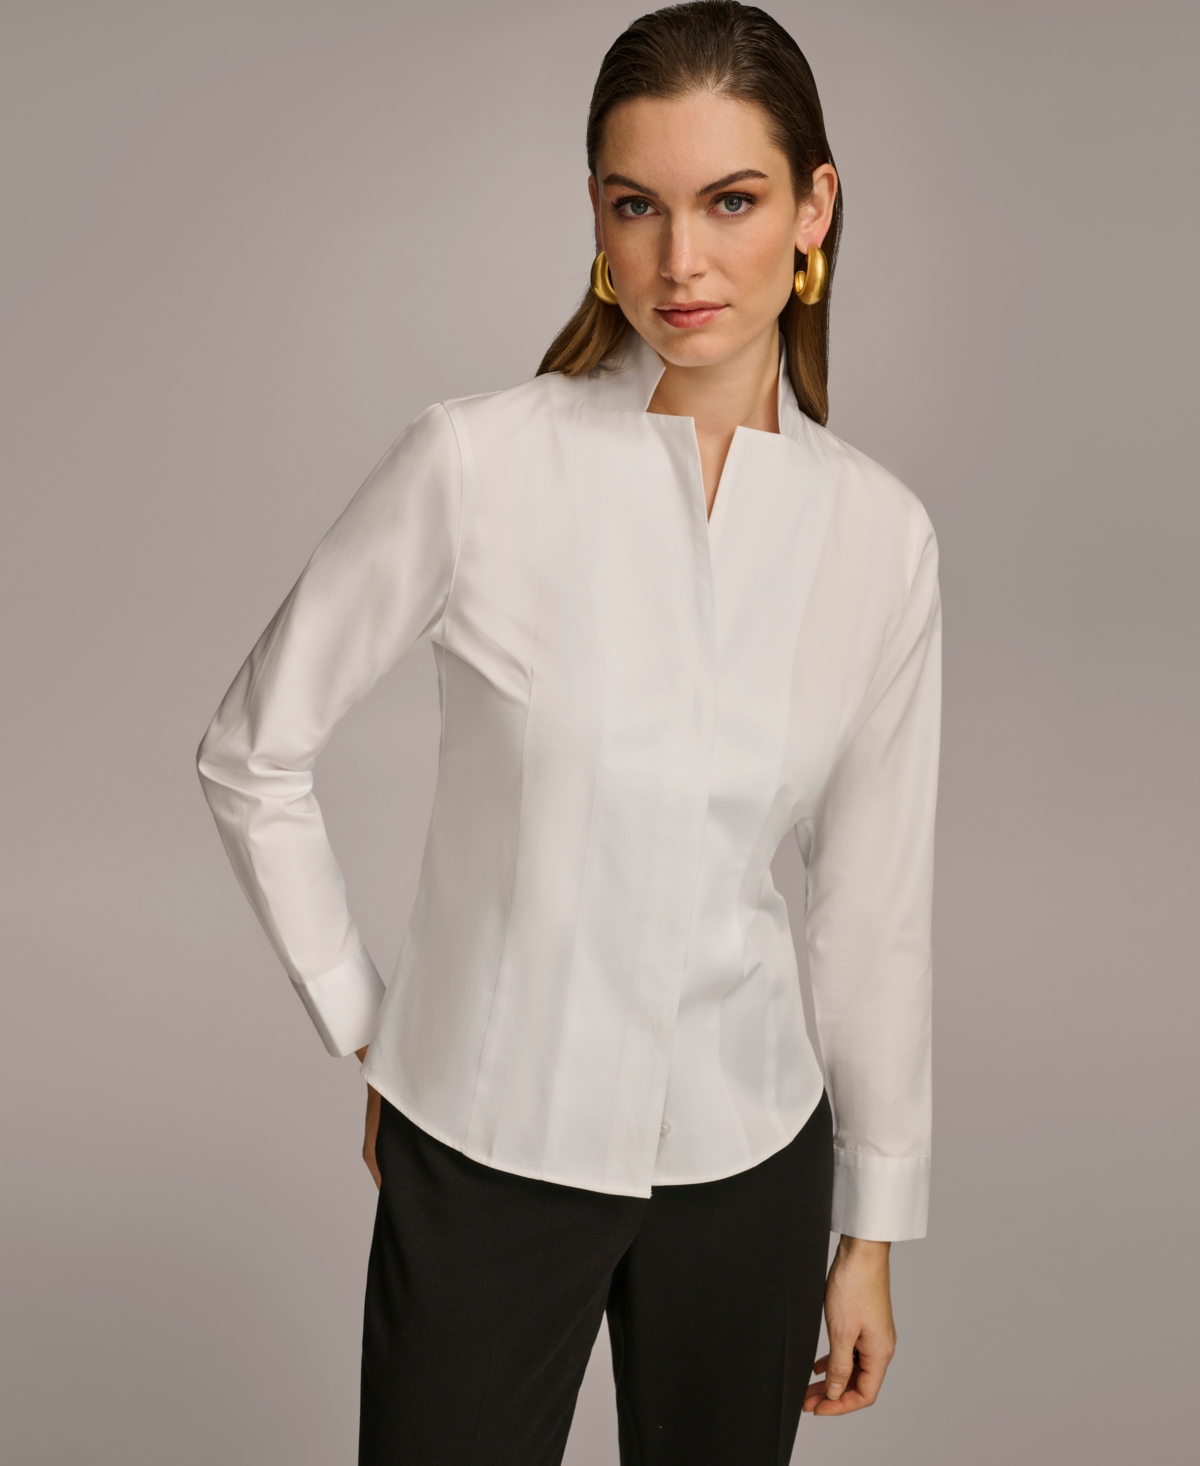 Women's Stand Collar Button Front Cotton Shirt - White